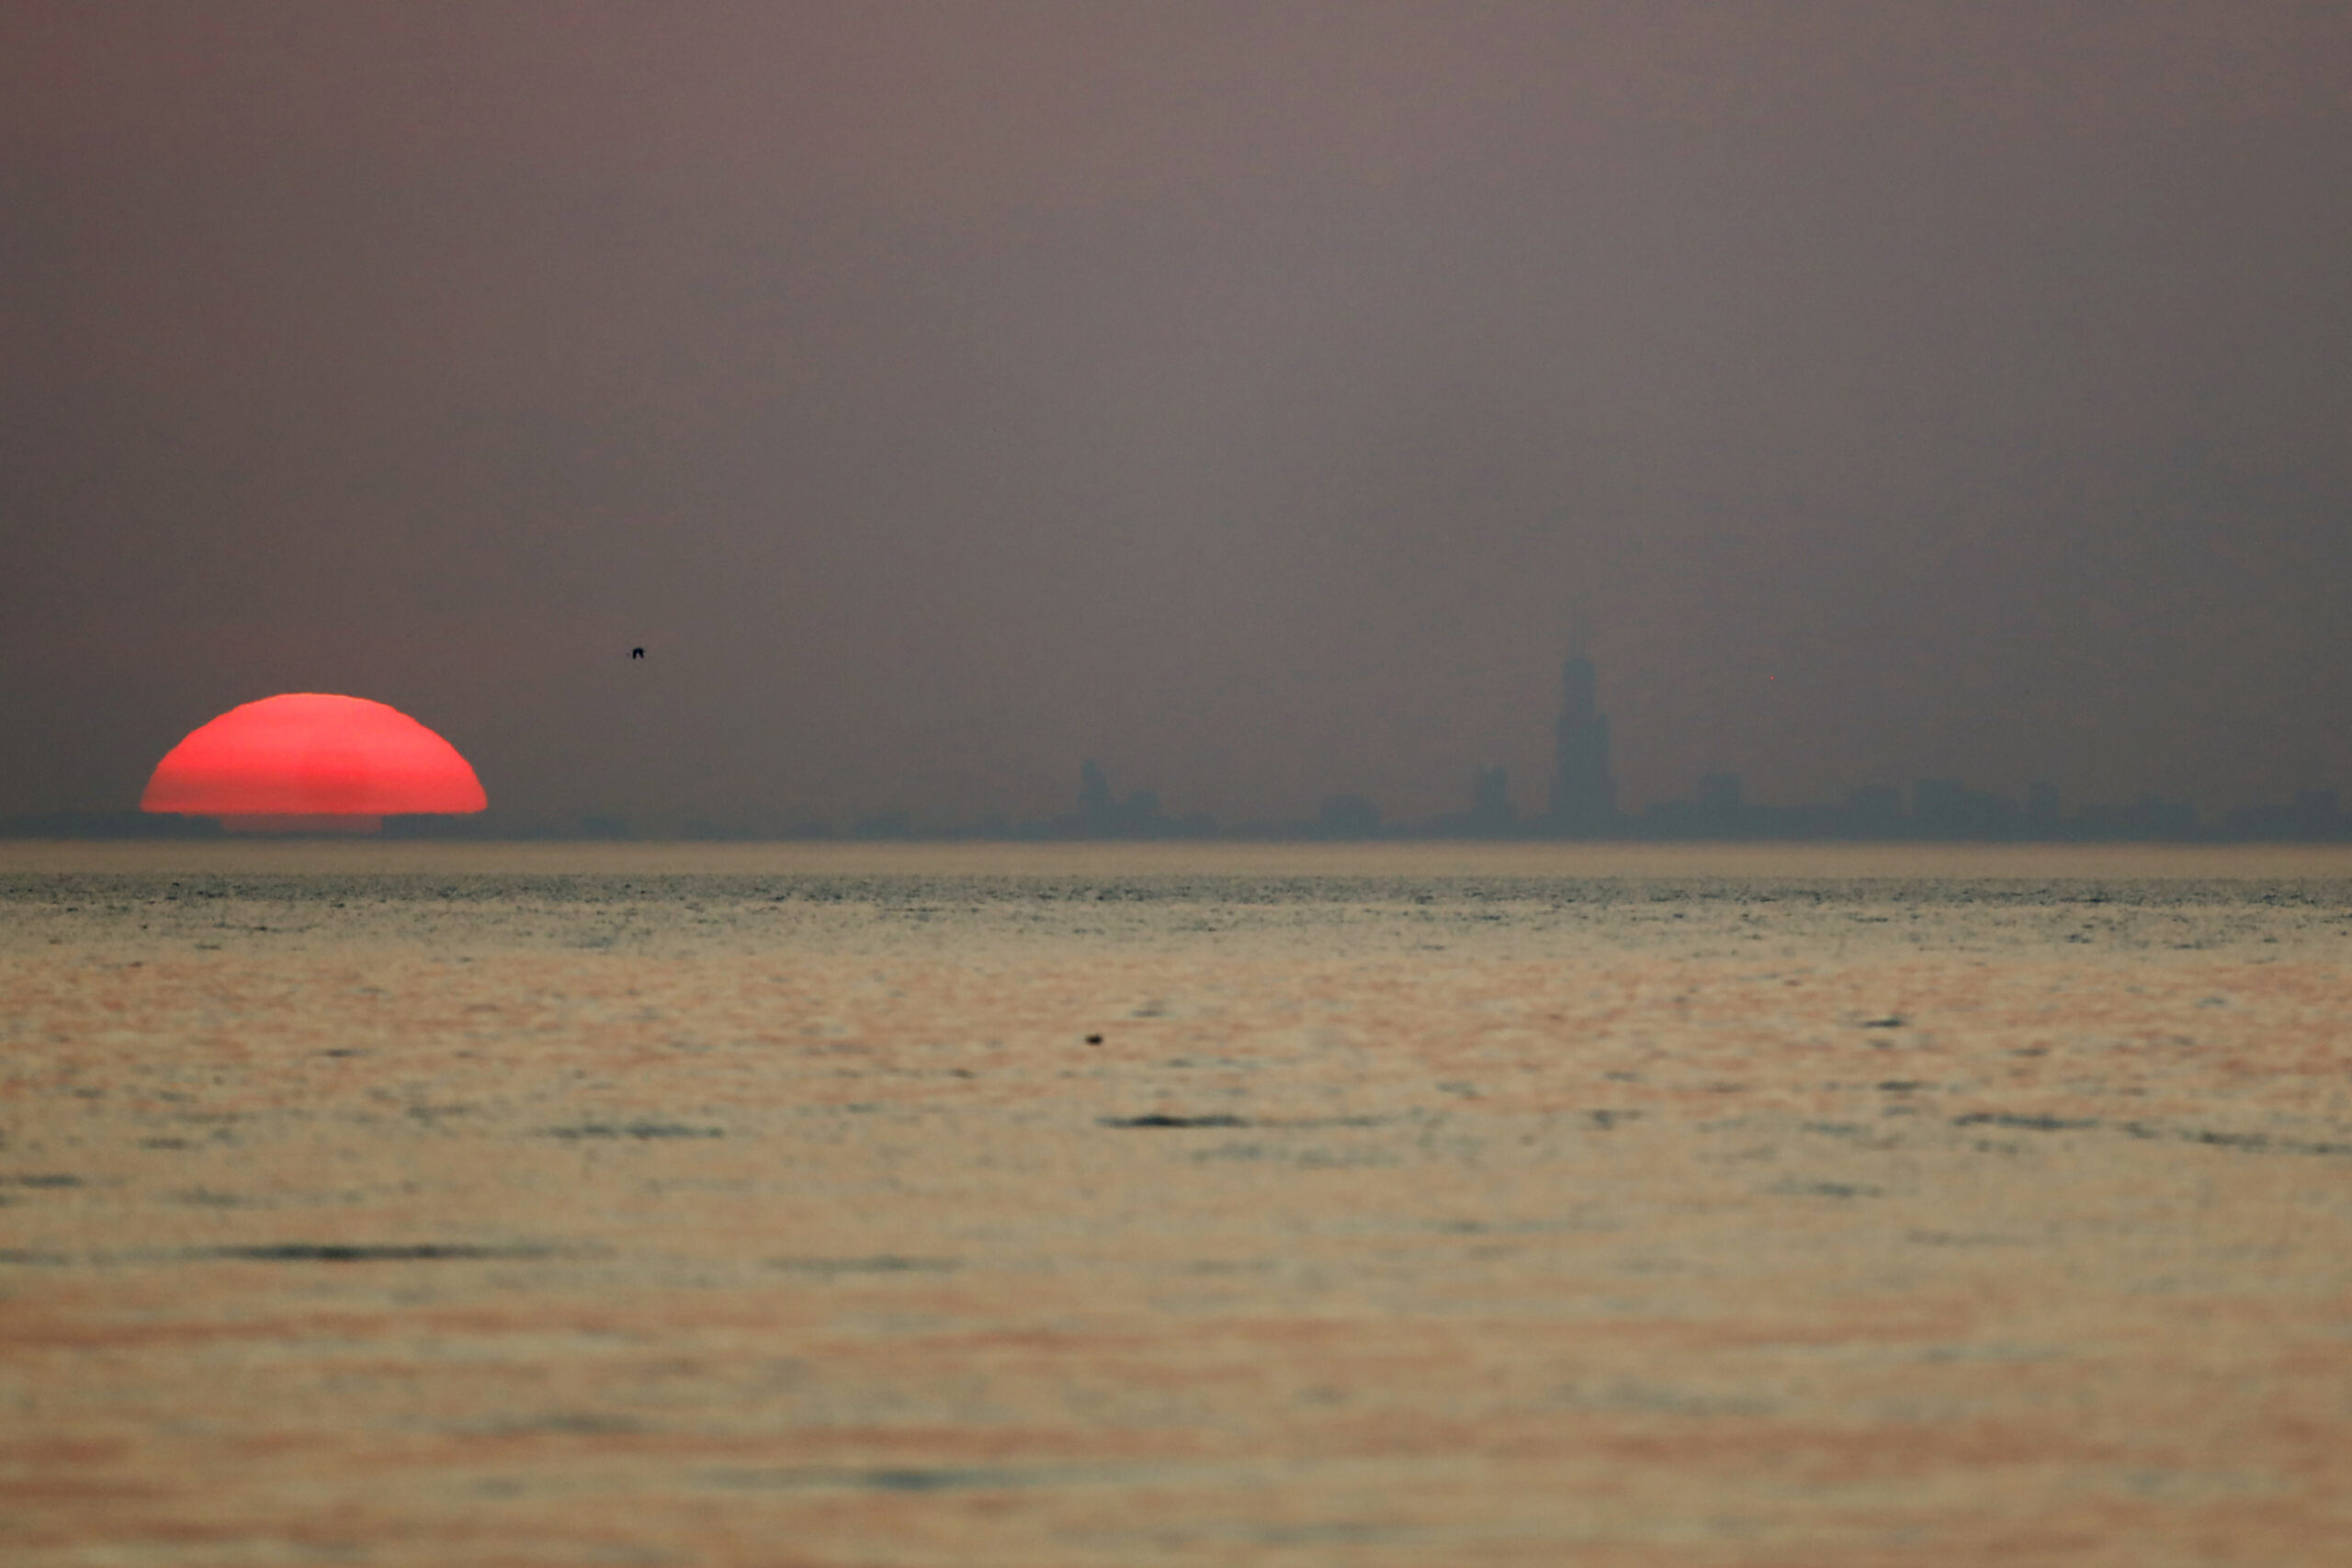 Chicago skyline appears through haze from wildfires in the American West.